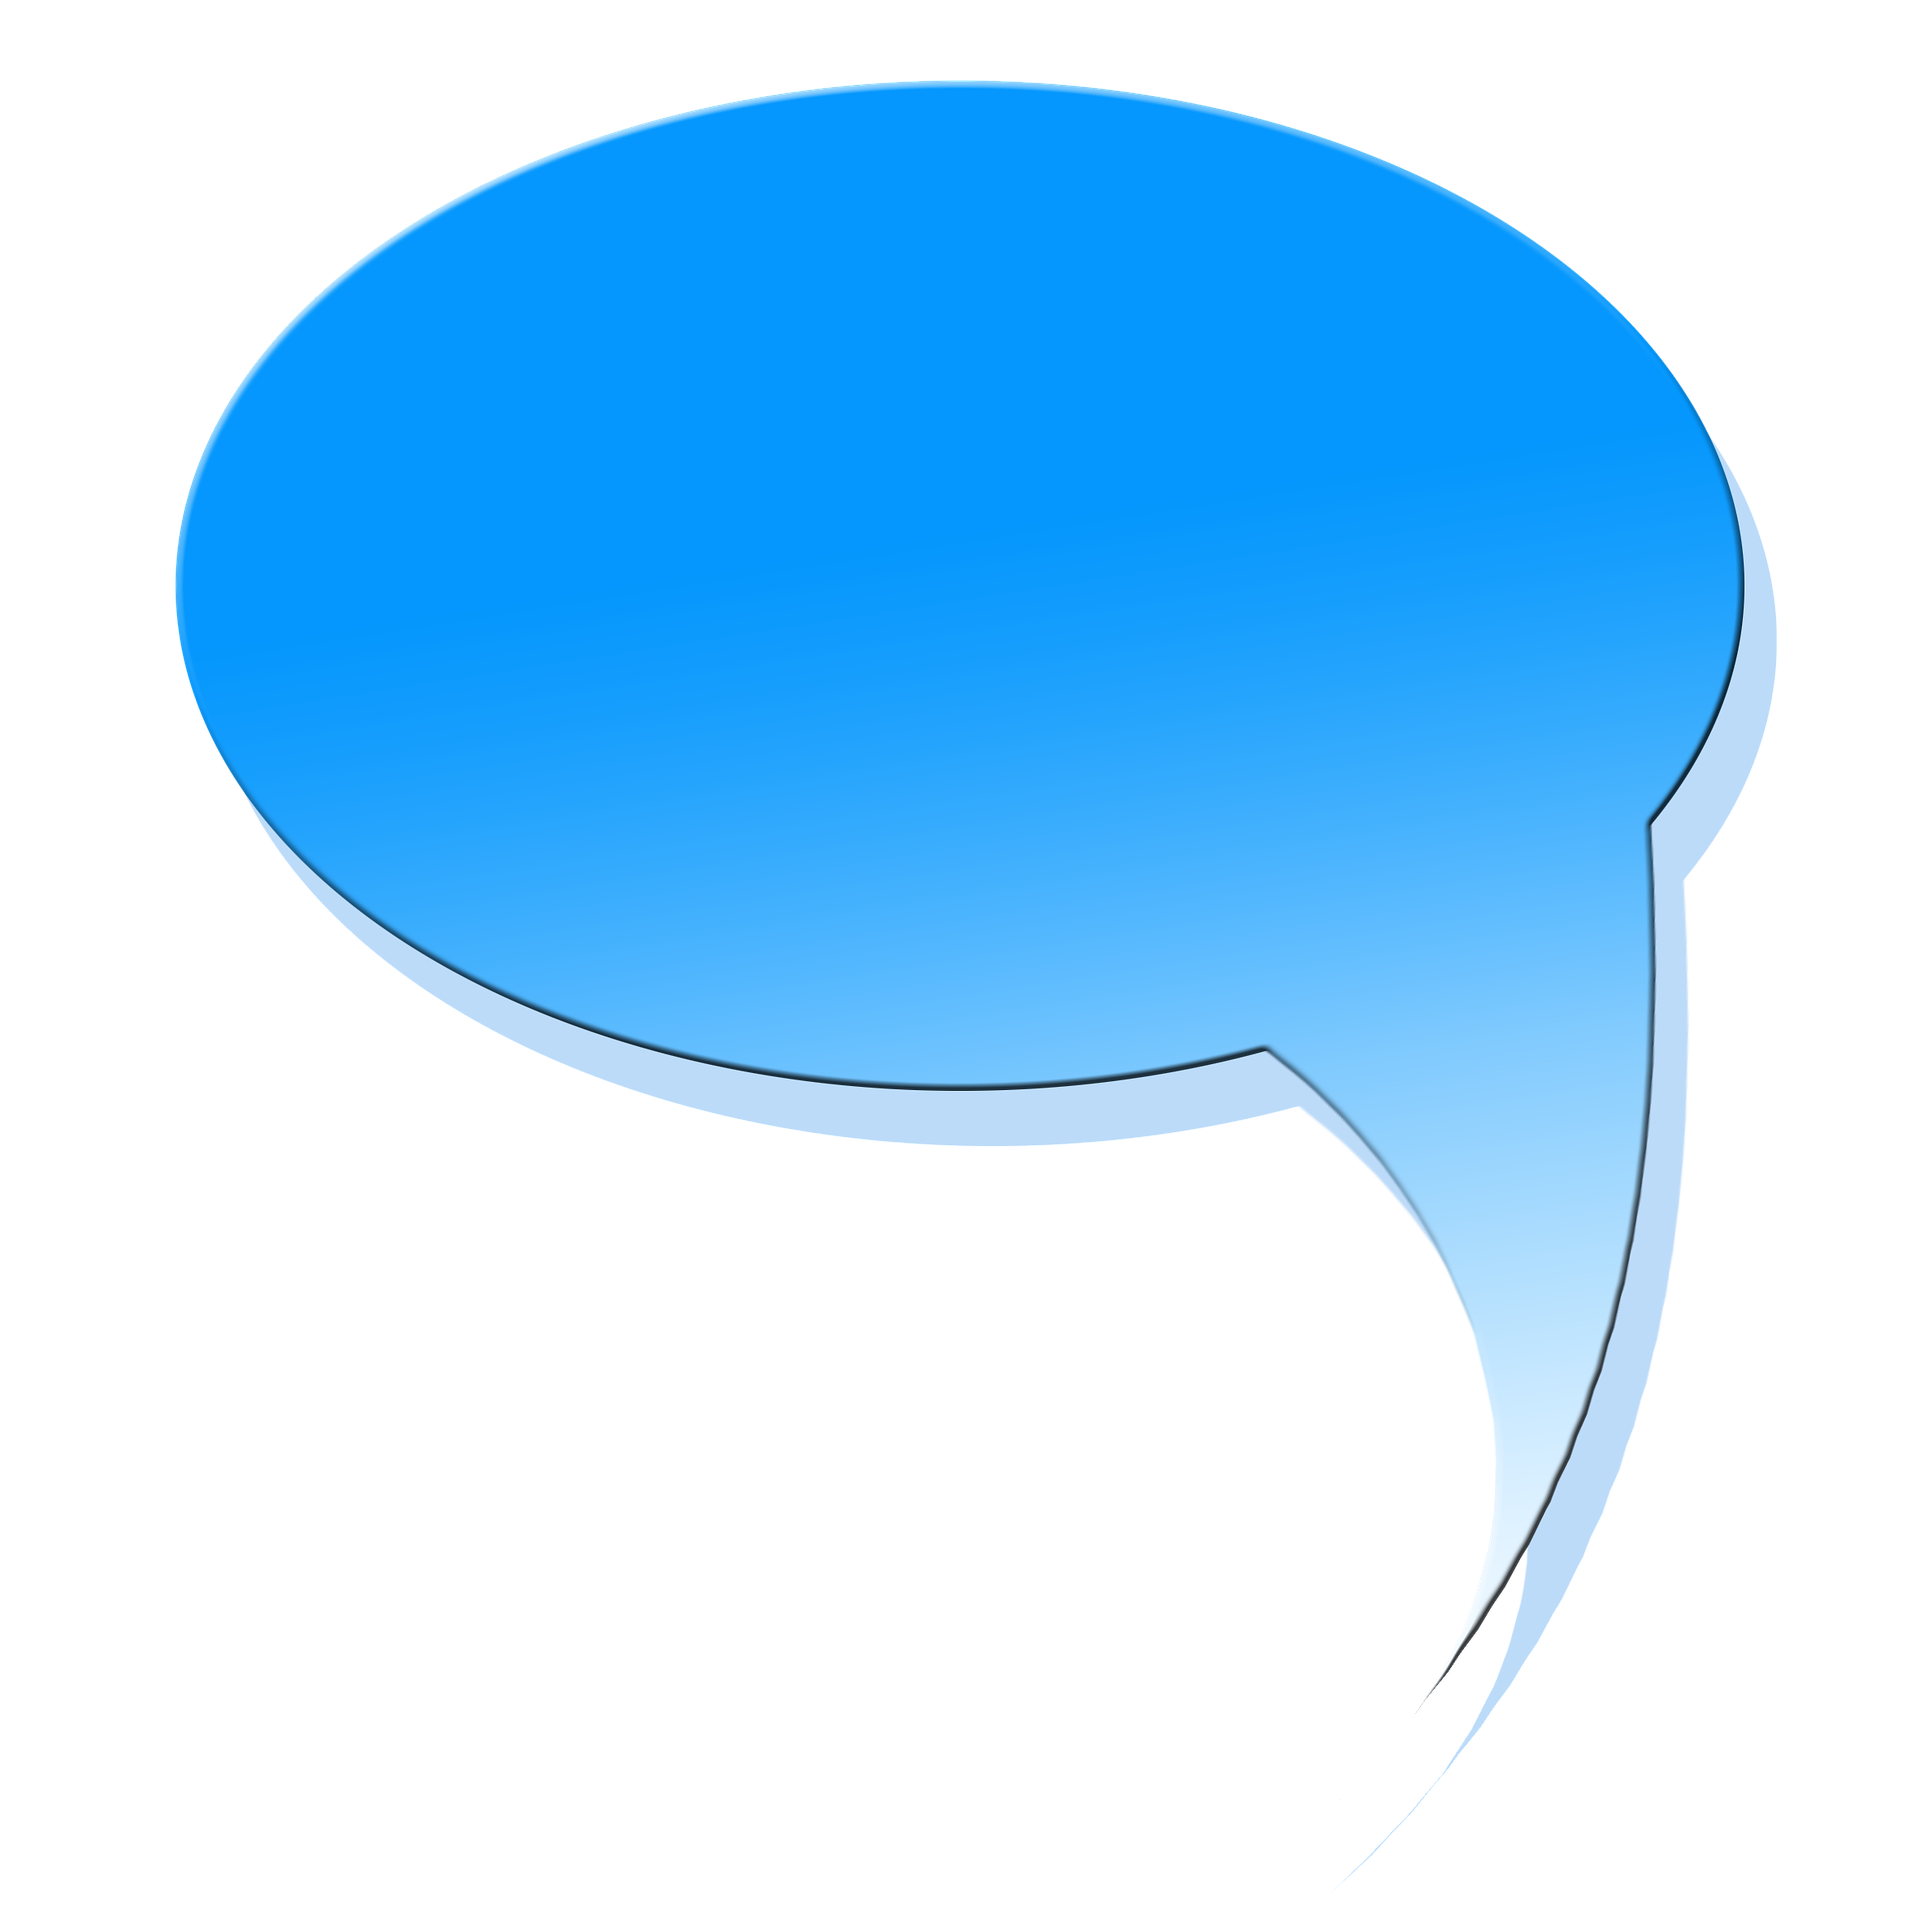 image of a speak bubble for the Contact page